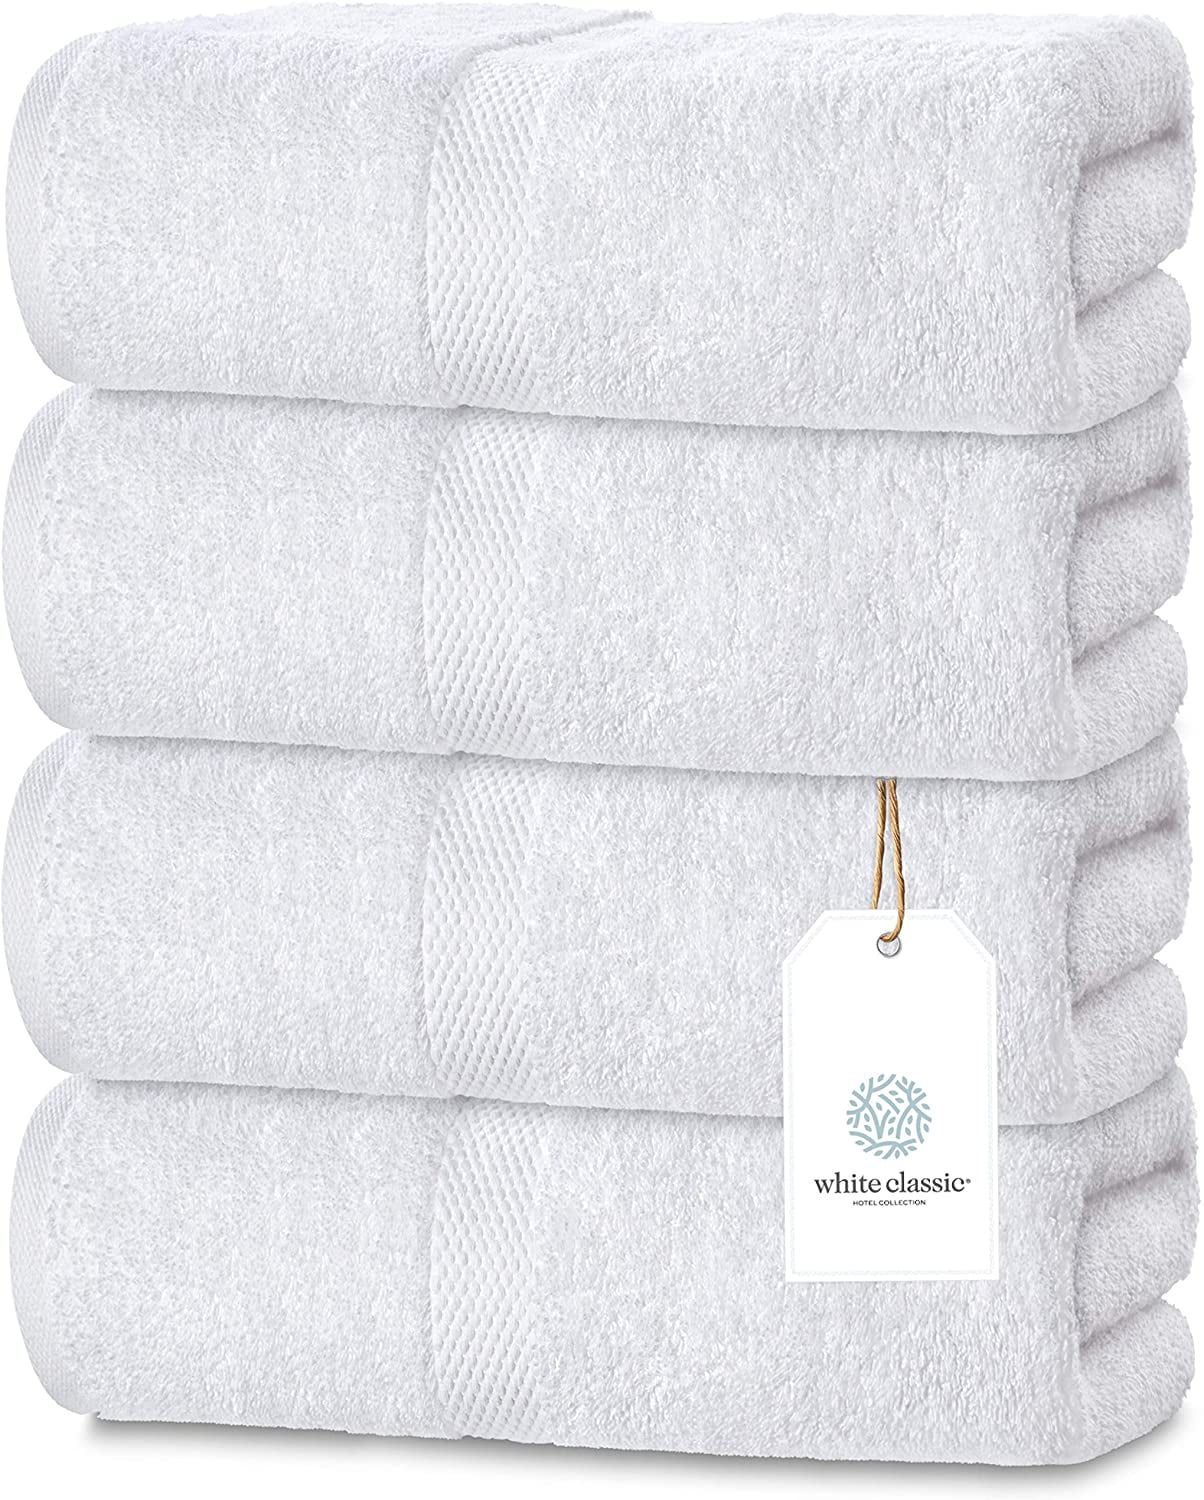 Adults Bath Towel Luxury Solid Black Large Soft Hotel Spa  100% Cotton Towels 